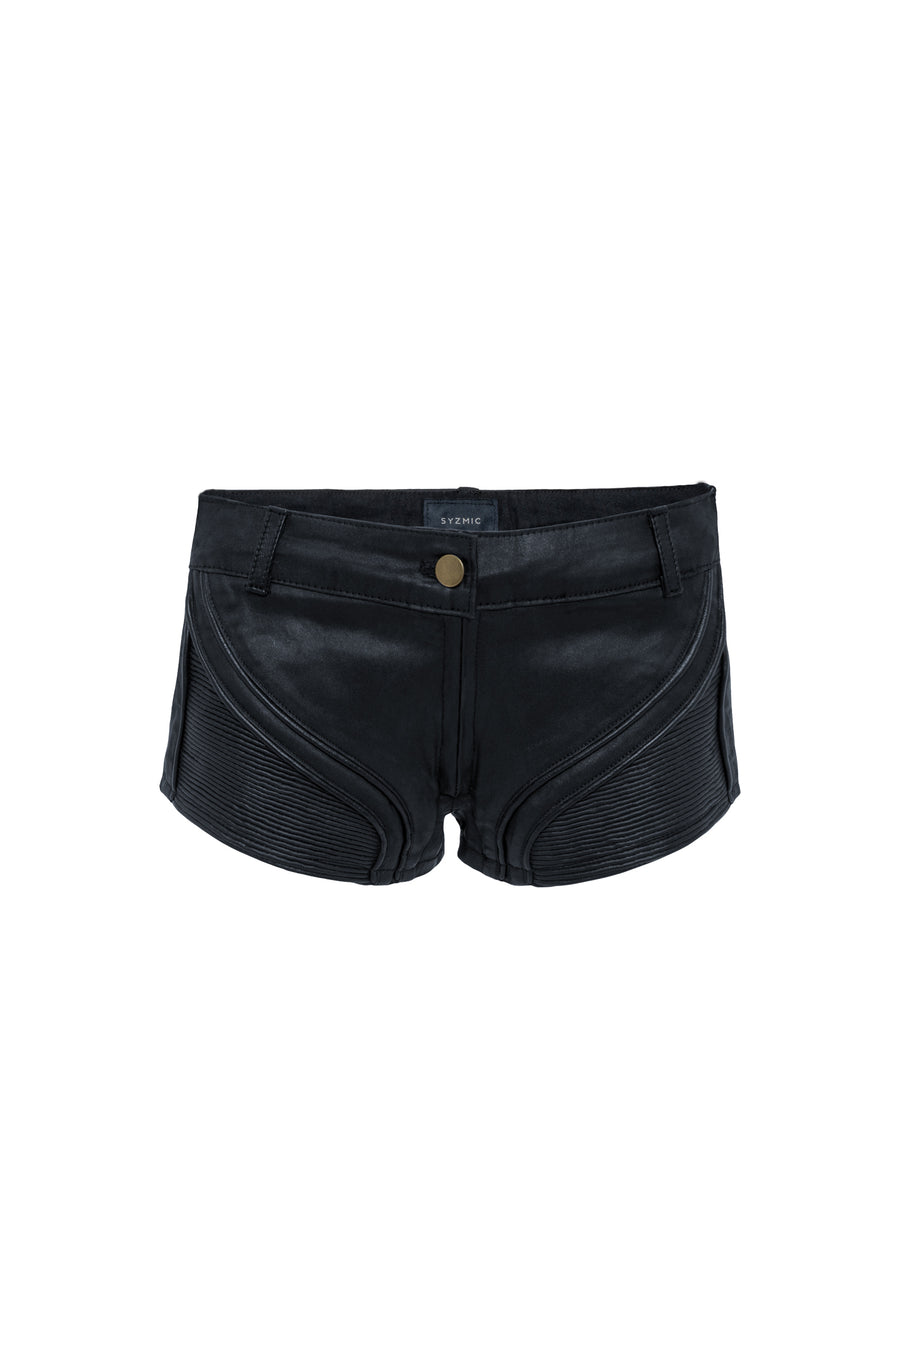 Minding My Business Ribbed Booty Shorts Black